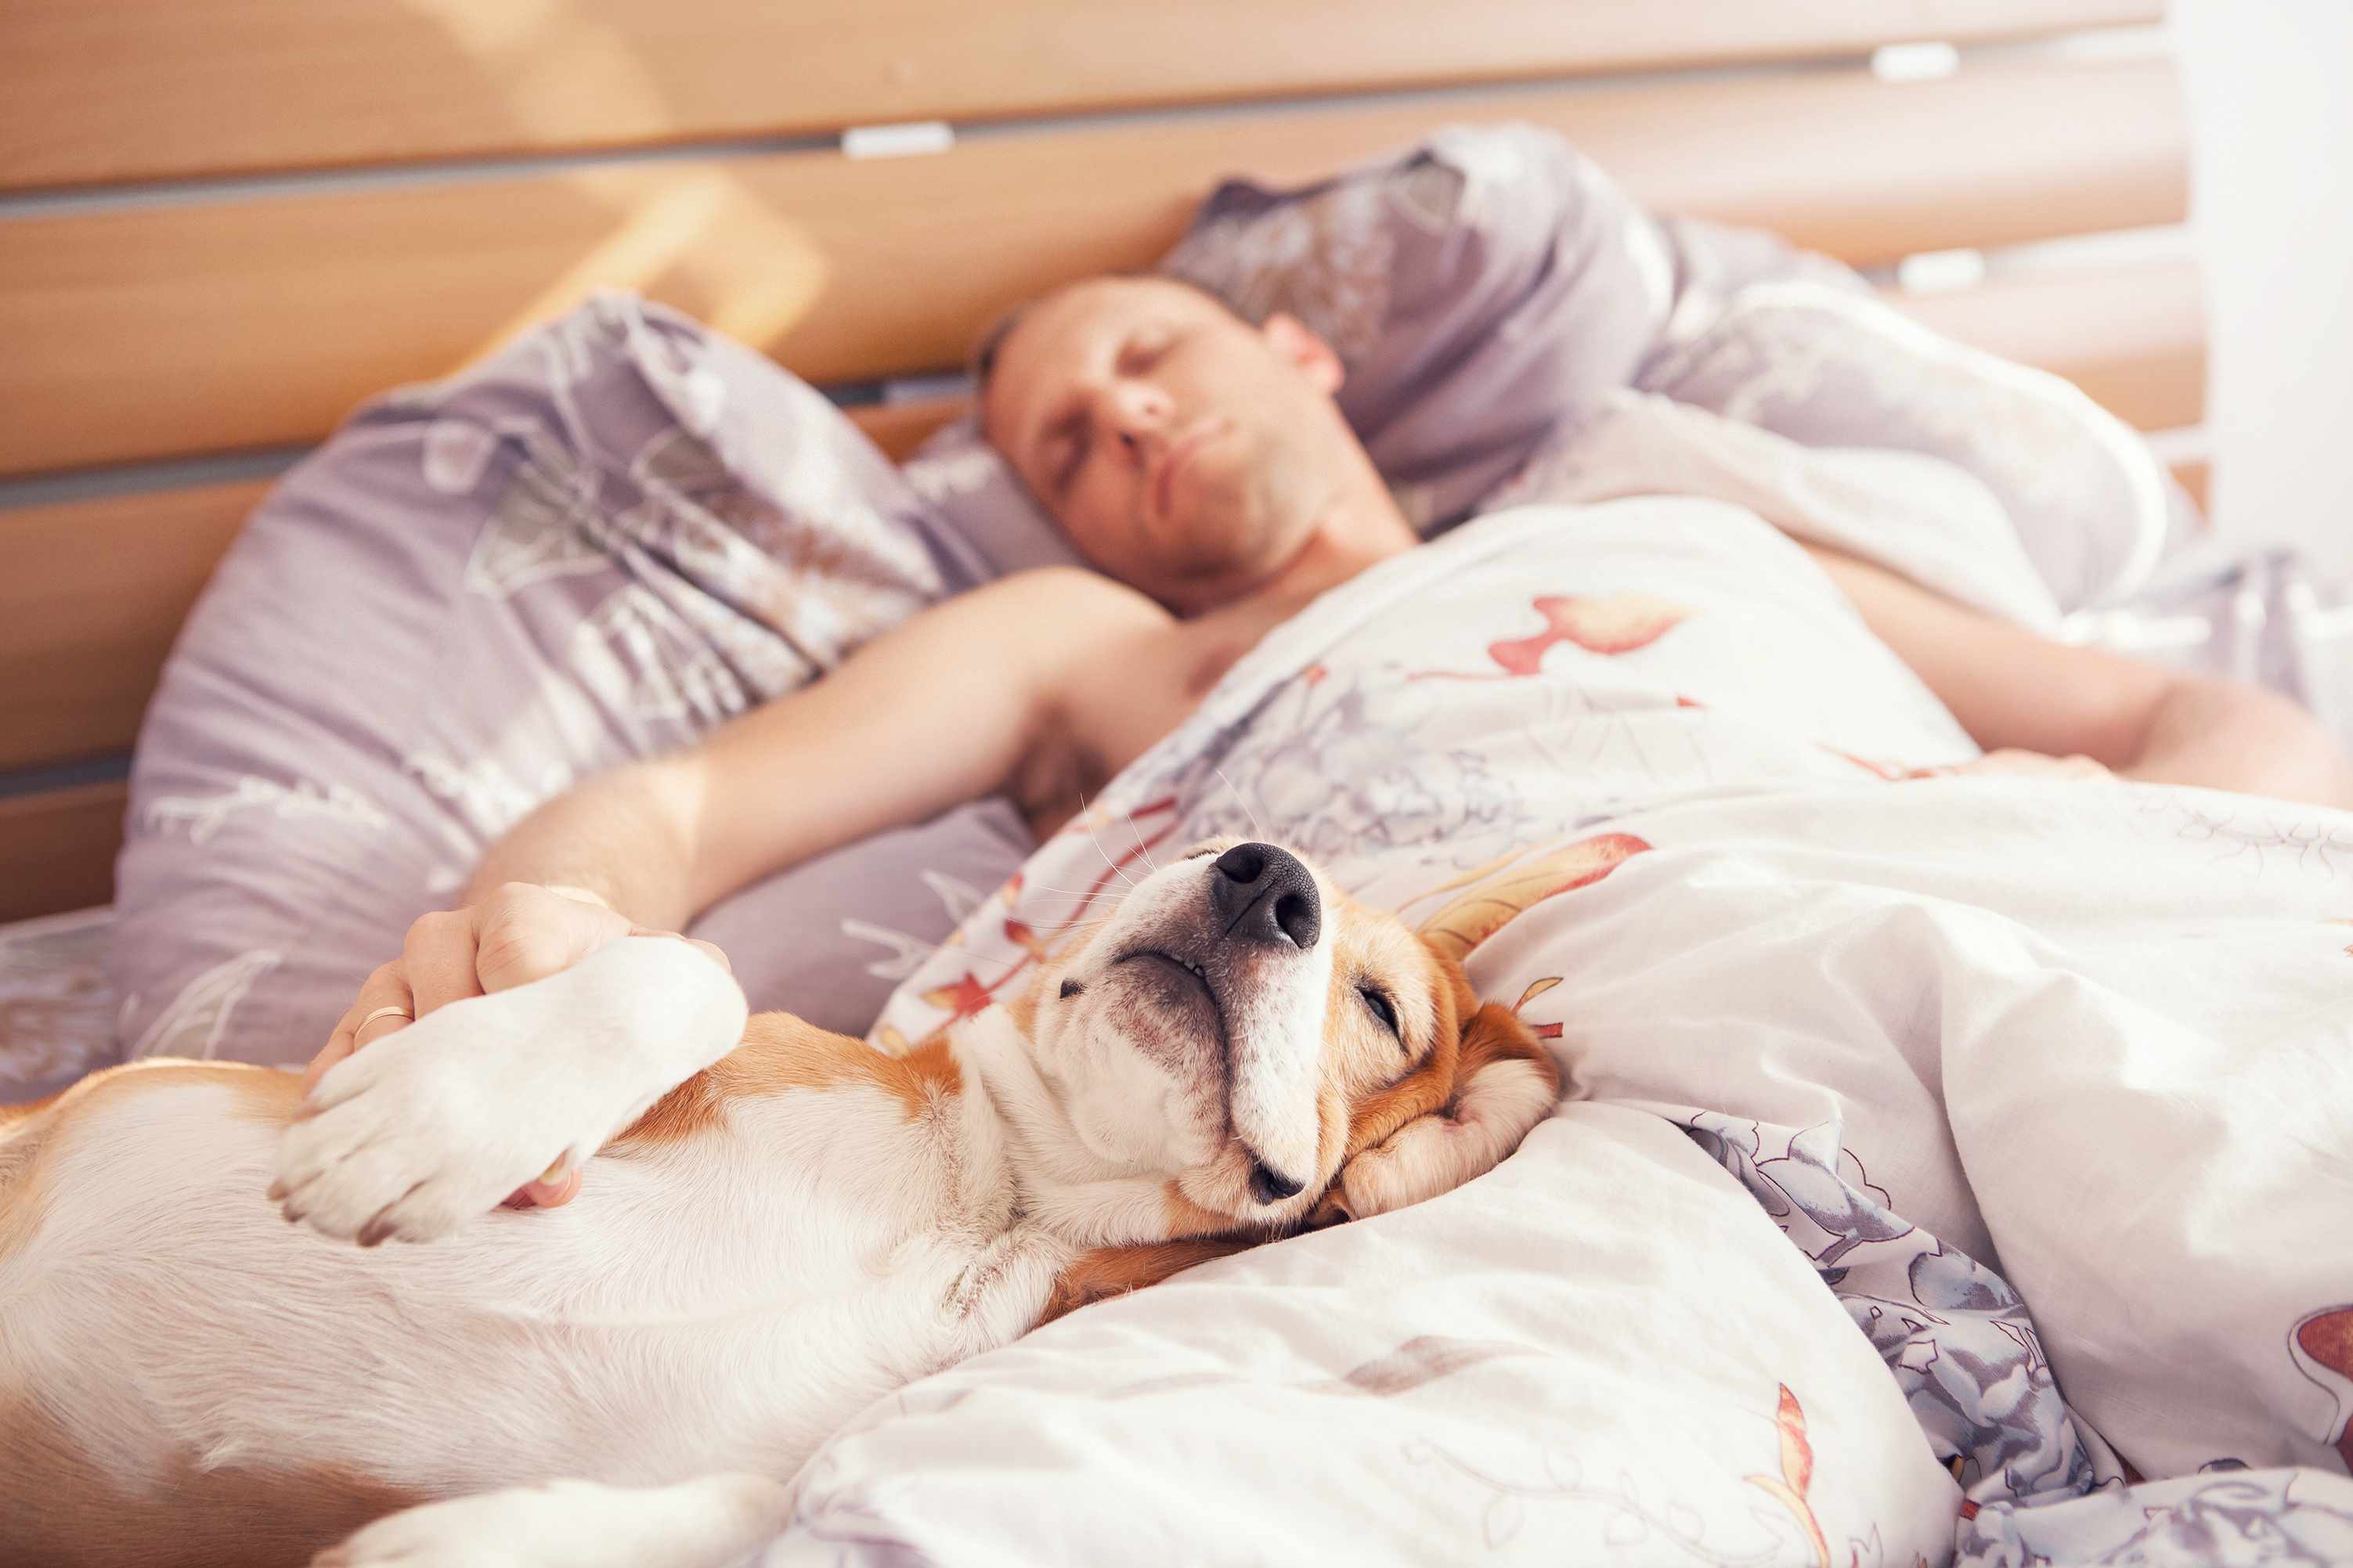 HOW MANY OF US SLEEP WITH OUR PETS?